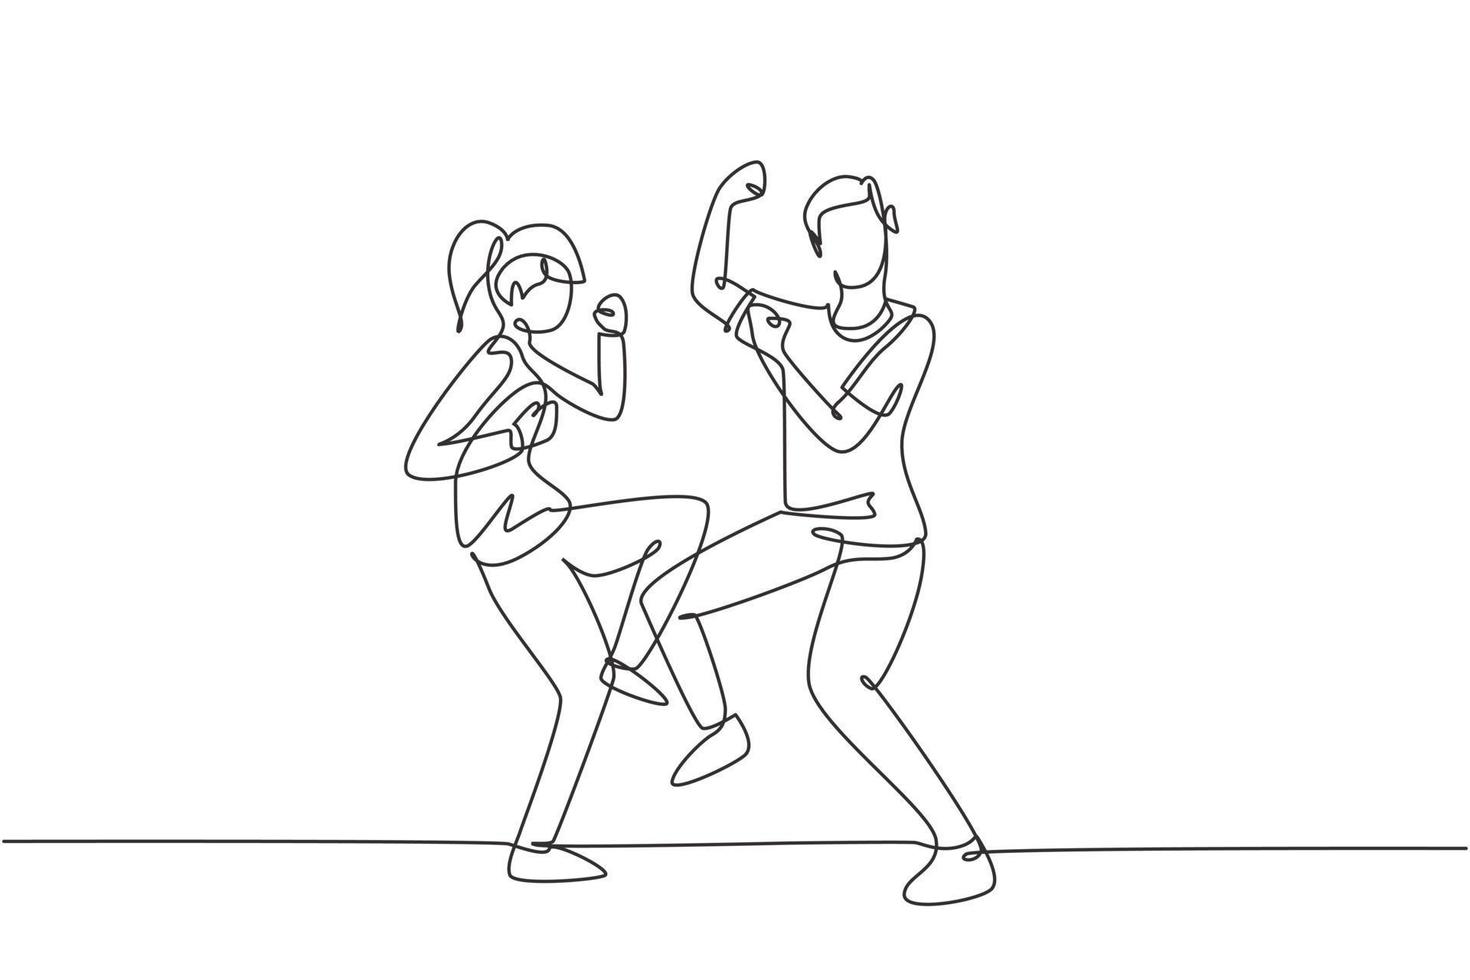 Single one line drawing man woman dancing Lindy hop or Swing together. Male and female characters performing dance at school or party. Modern continuous line draw design graphic vector illustration